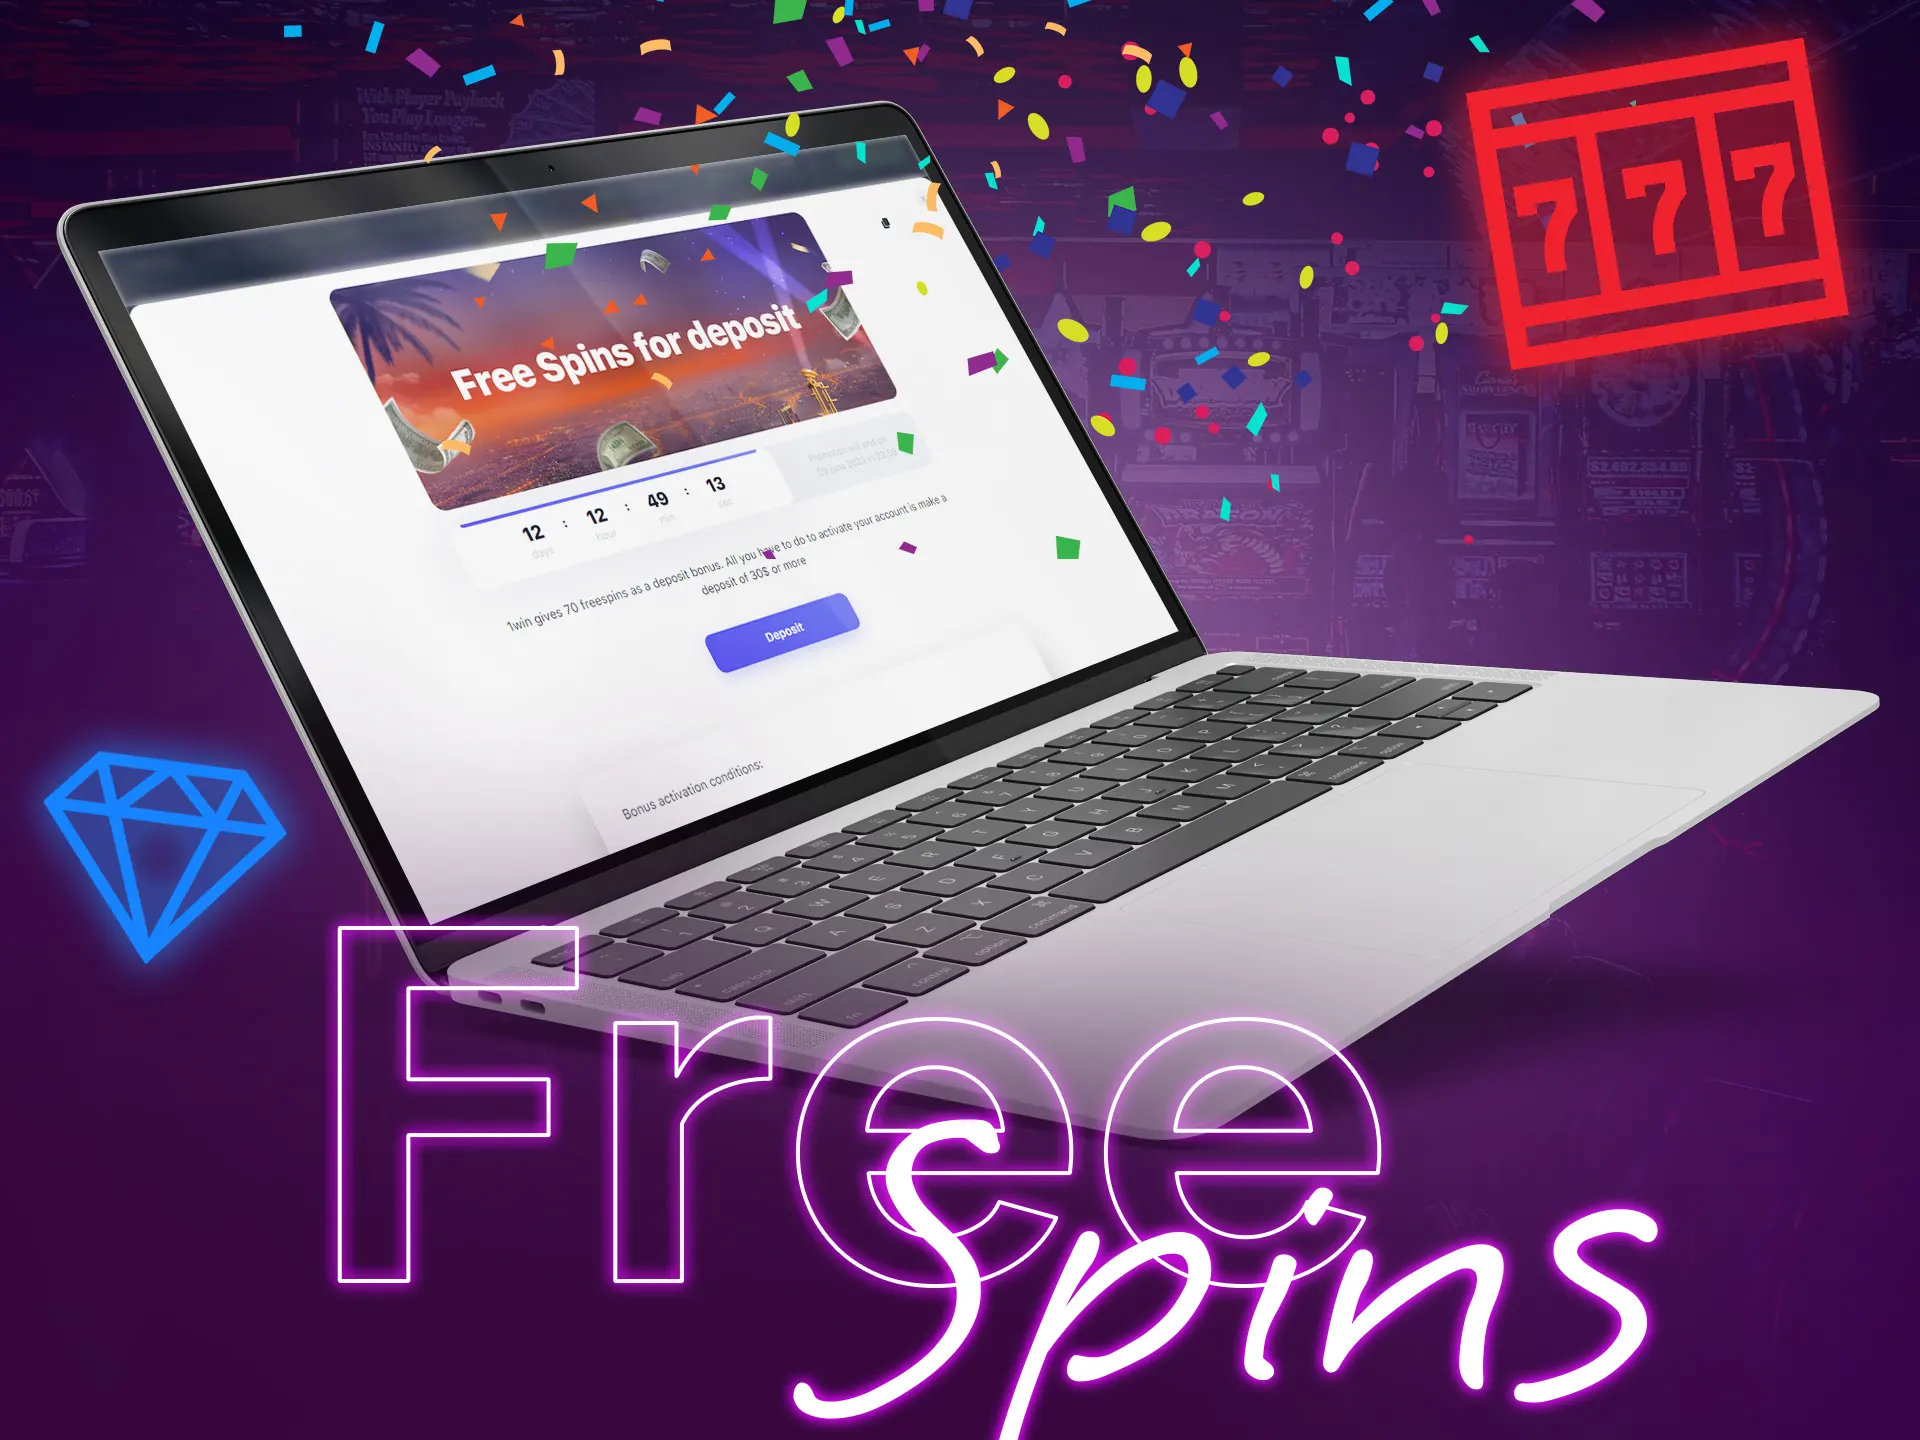 Free spins allow players to try a game with the usage of no-risk spins.